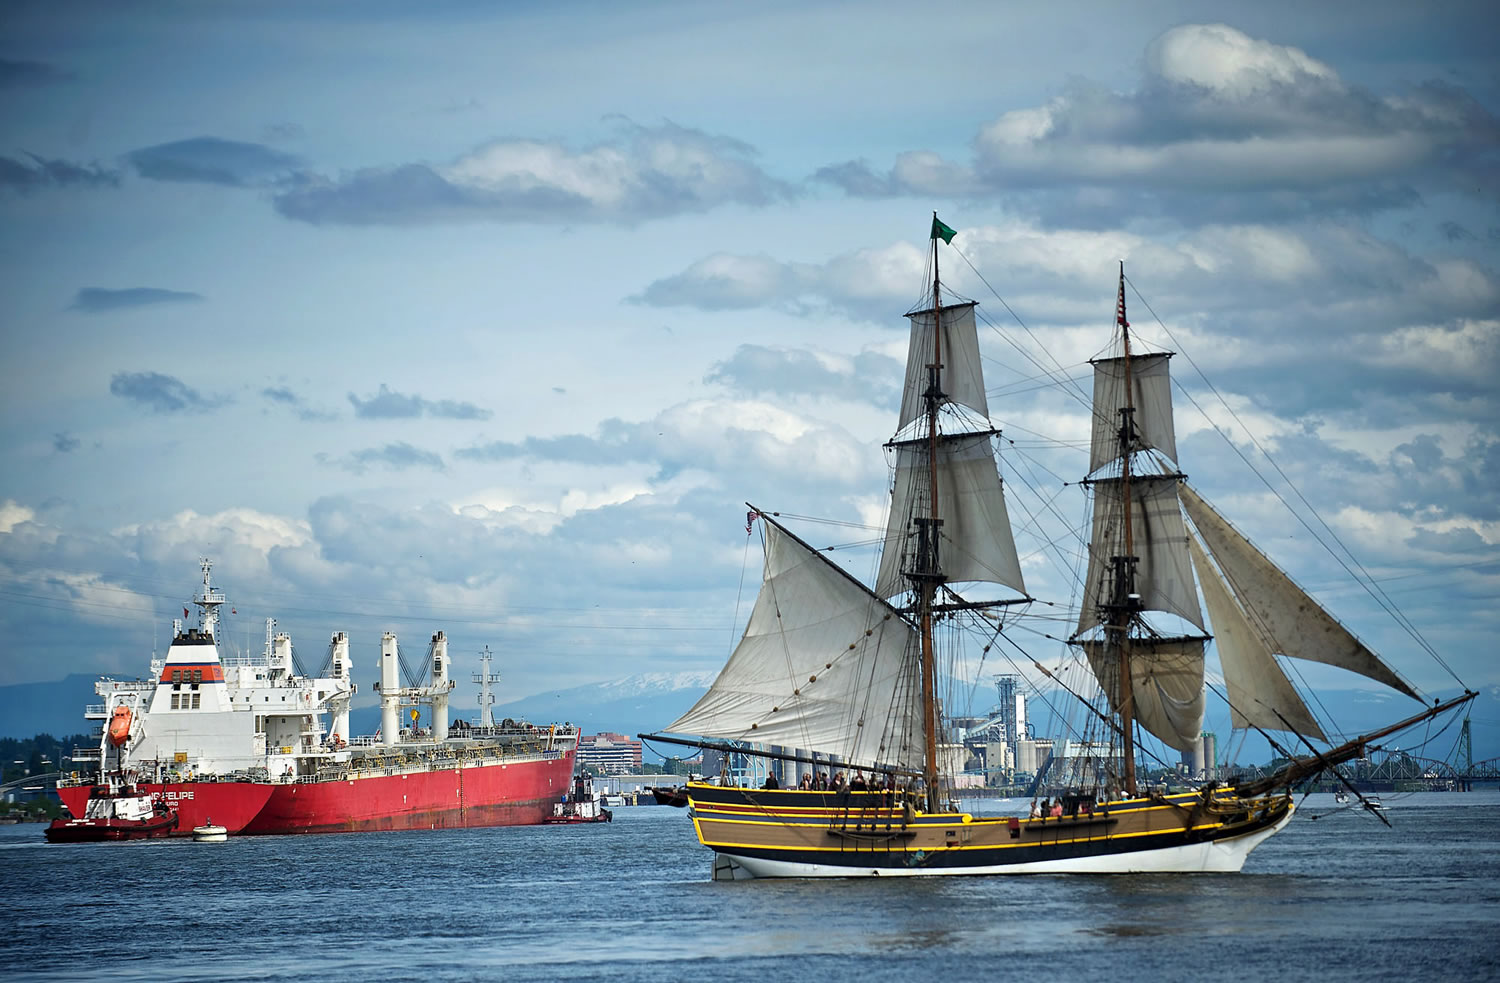 The Lady Washington gets out of the path of a large commercial ship during a battle sail on the Columbia River.